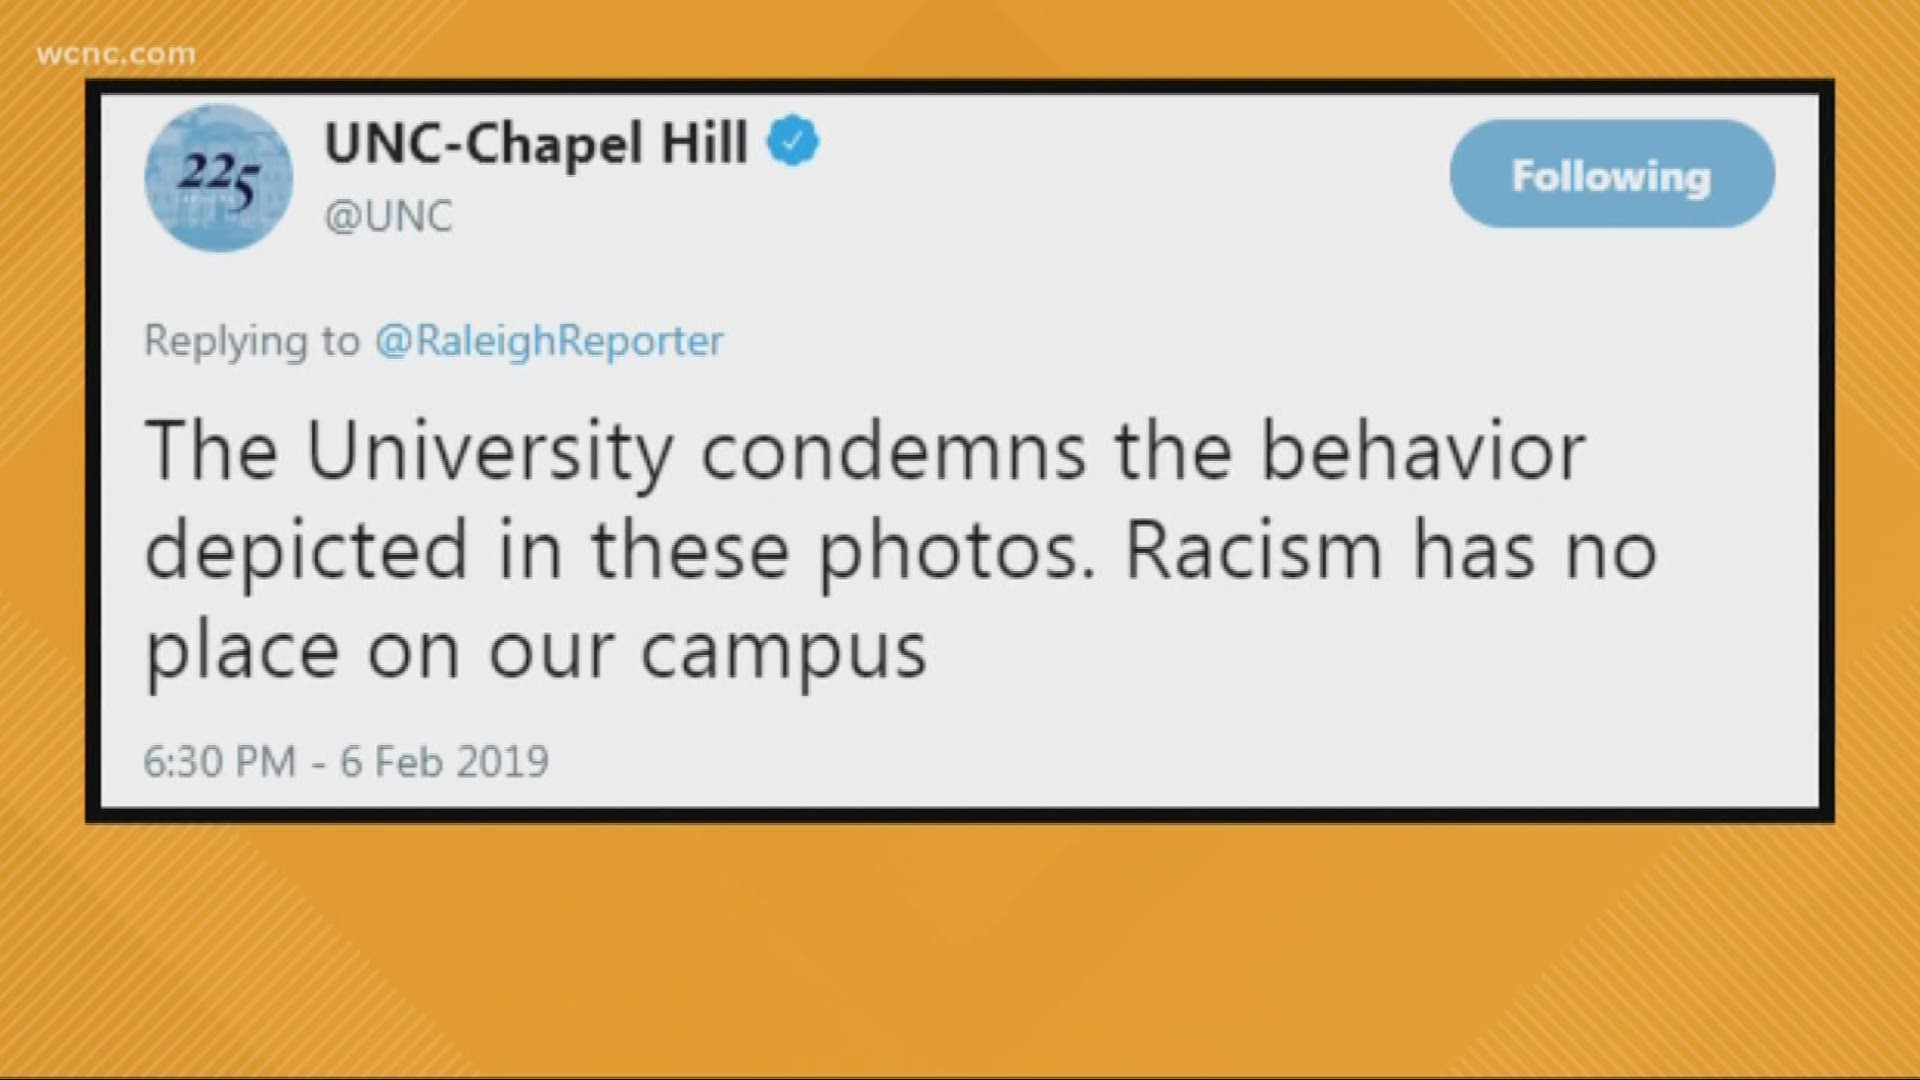 University of North Carolina Chapel Hill officials are responding after a shocking discovery in the pages of a yearbook from 1979 showed students in blackface and racist costumes.